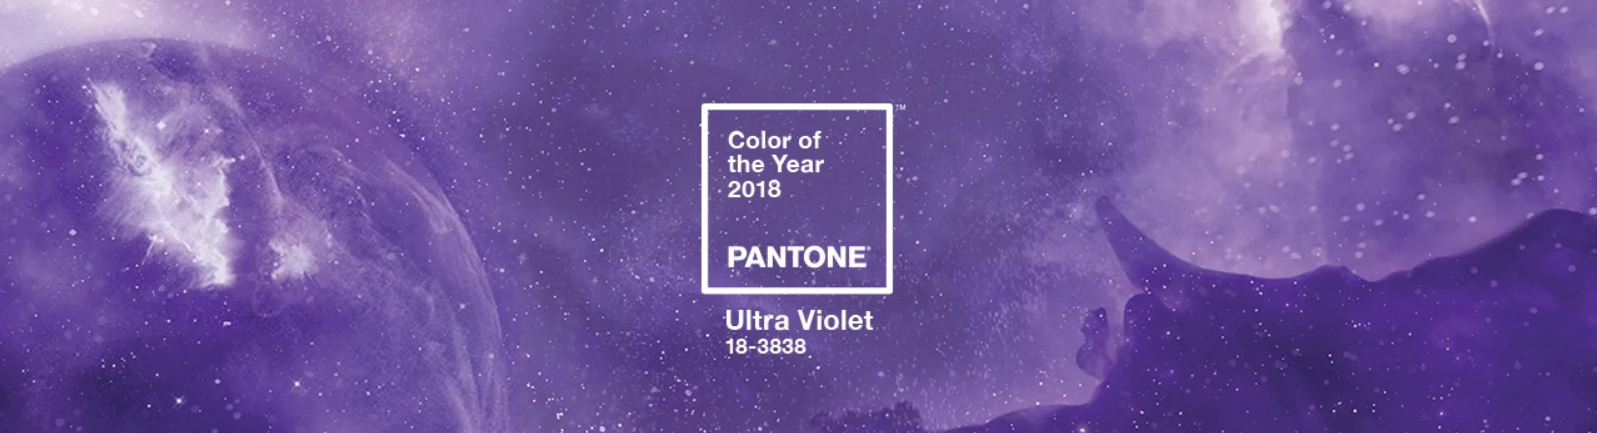 Color of the year 2018 - Ultra Violet 18-3838